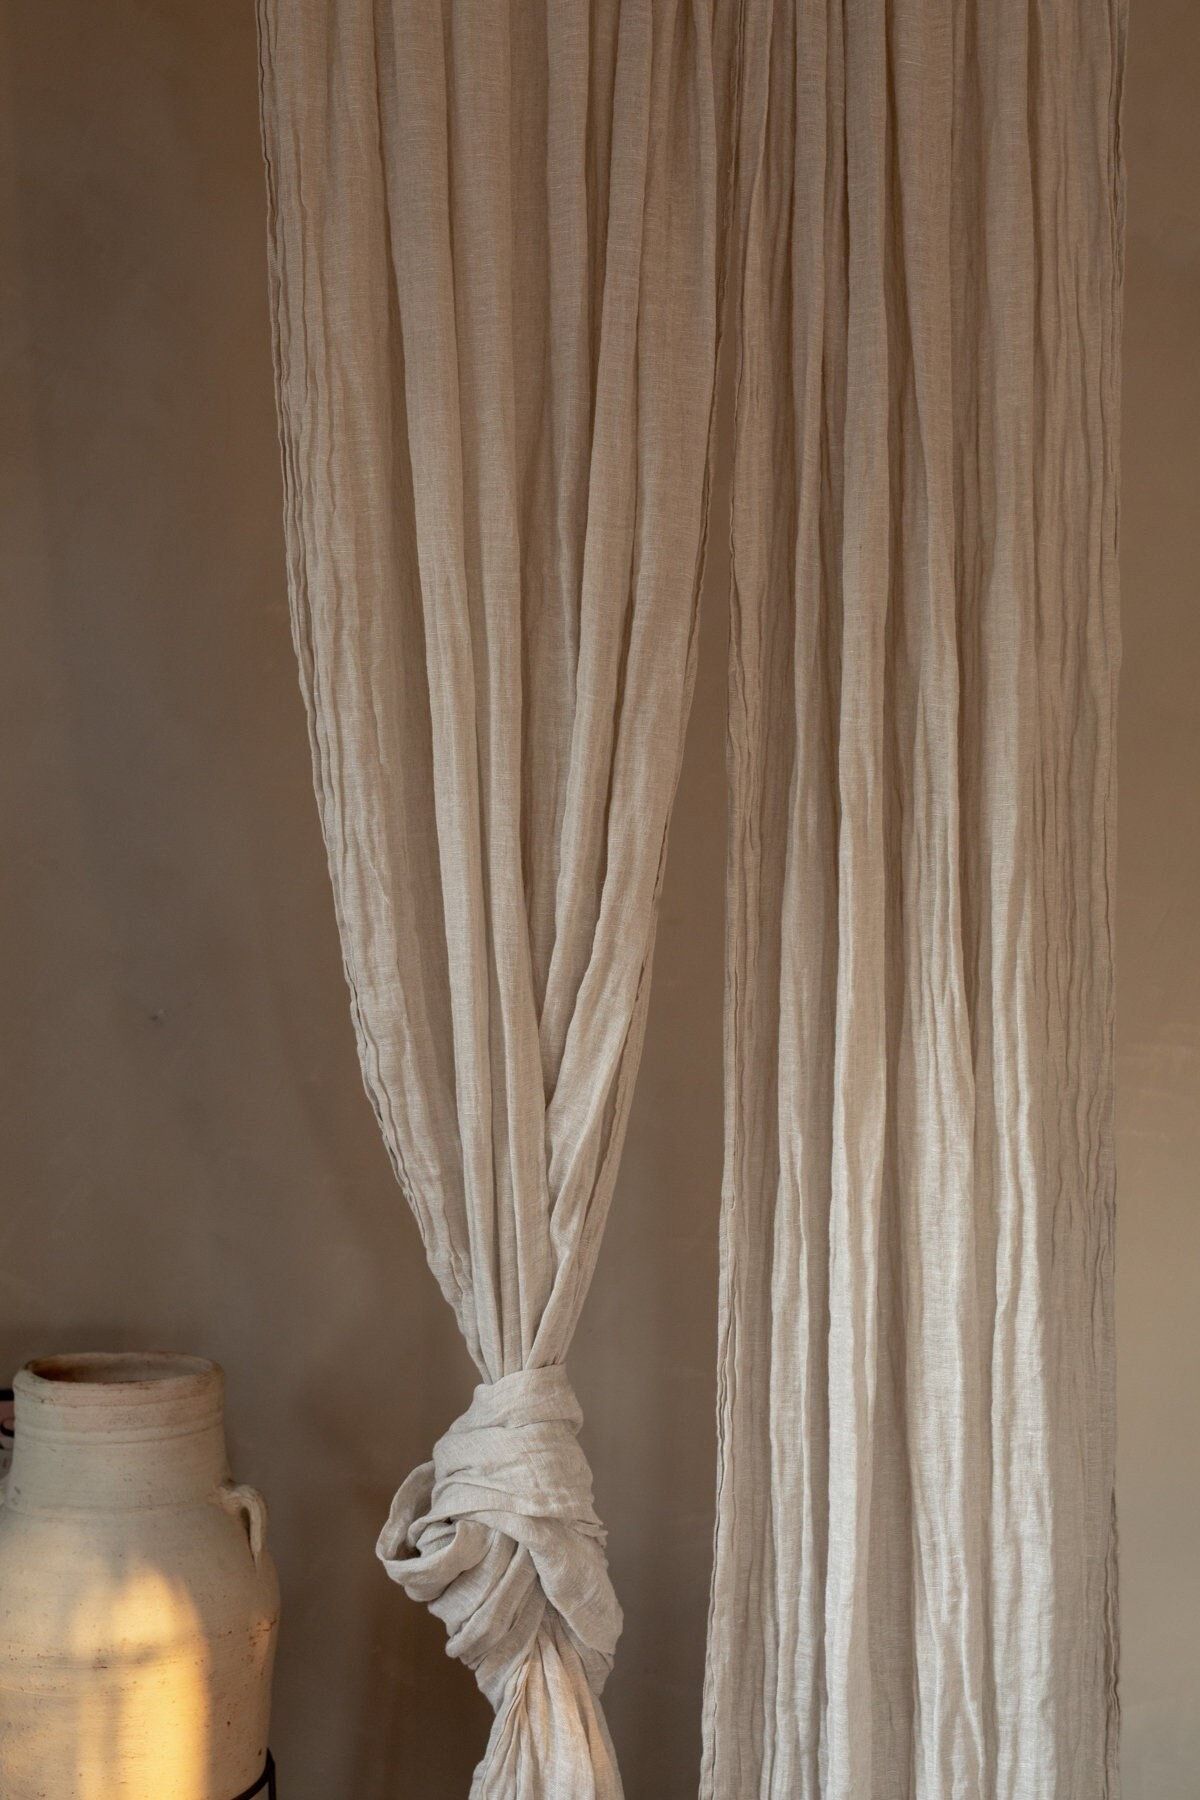 Linen Curtains: Adding Texture and Elegance to Your Home